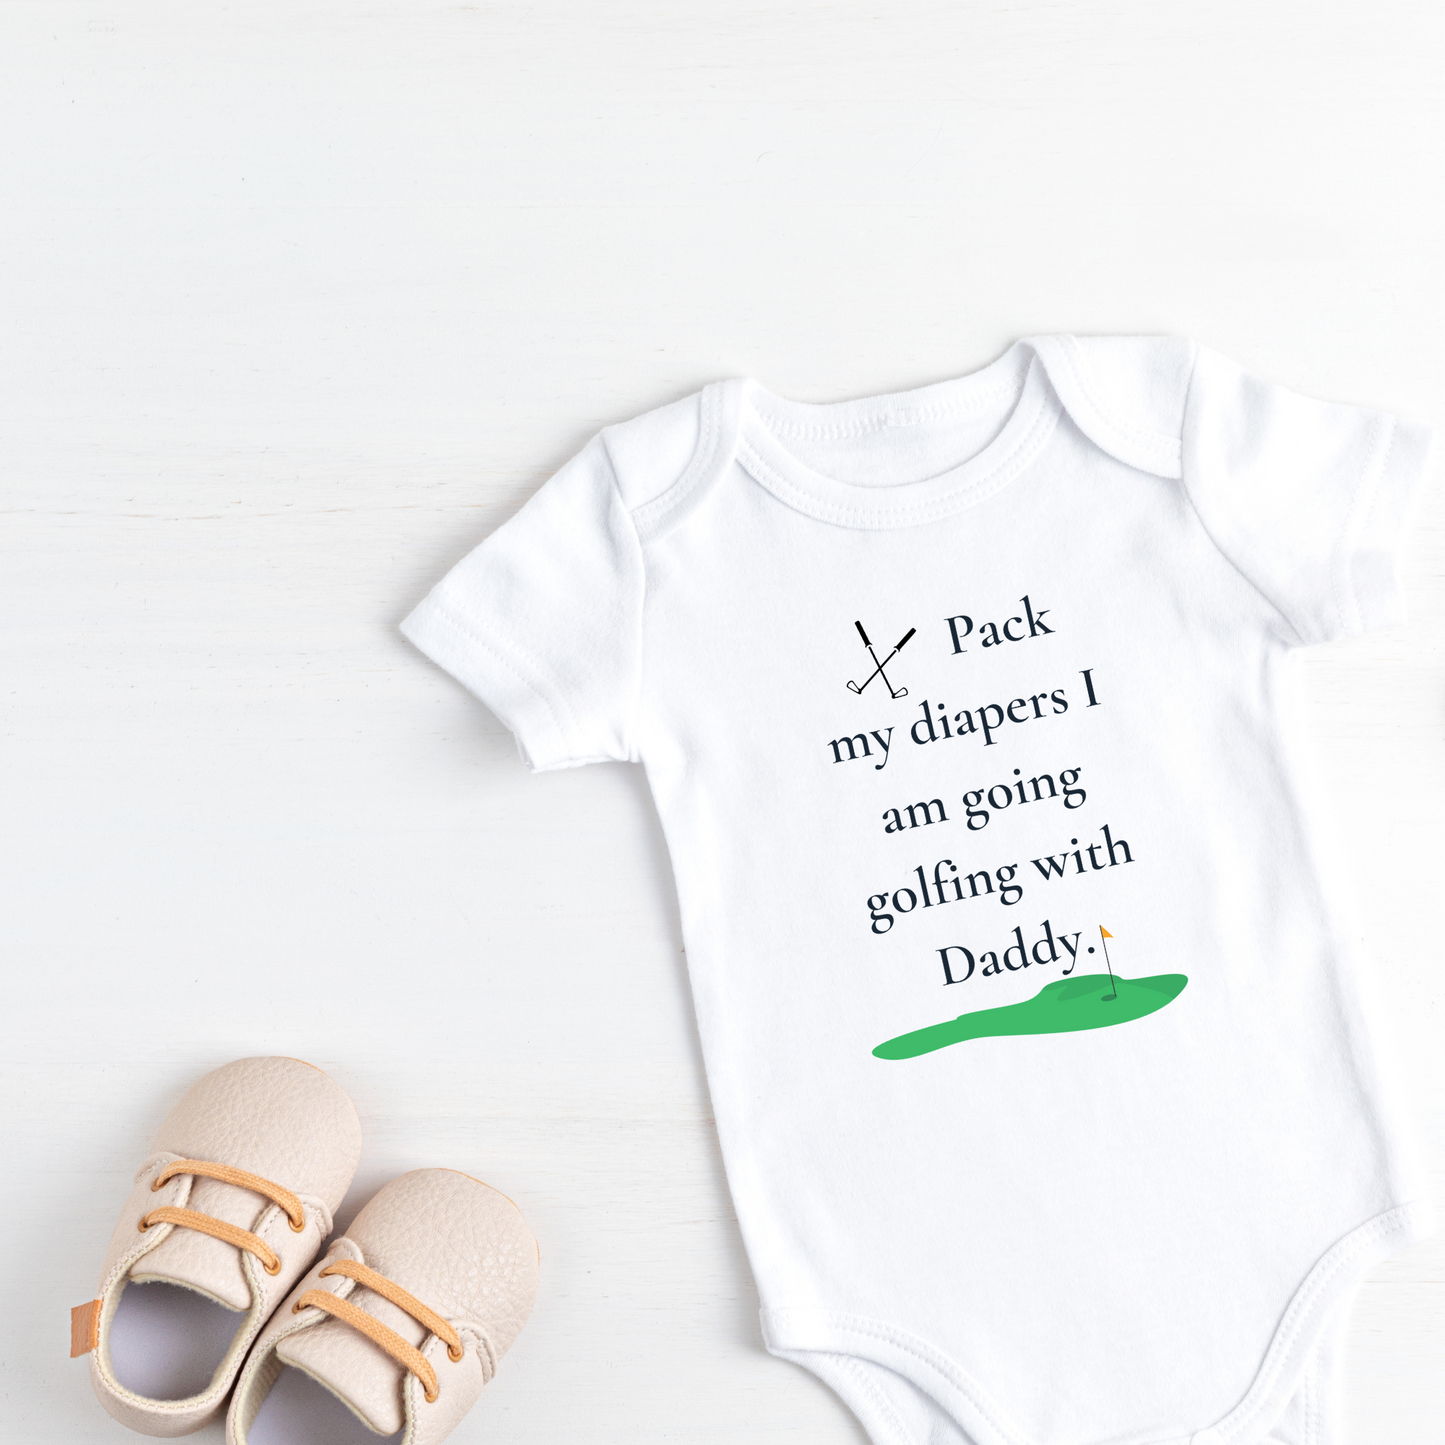 golf onesies for baby | baby clothes and supplies with a golf theme | pack my diaper funny onesies | baby clothing | gift idea for golf | golfing outfit | baby golf | golf gifts | baby golf outfit | baby golf clothes | baby golf shirt | Golf Buddy